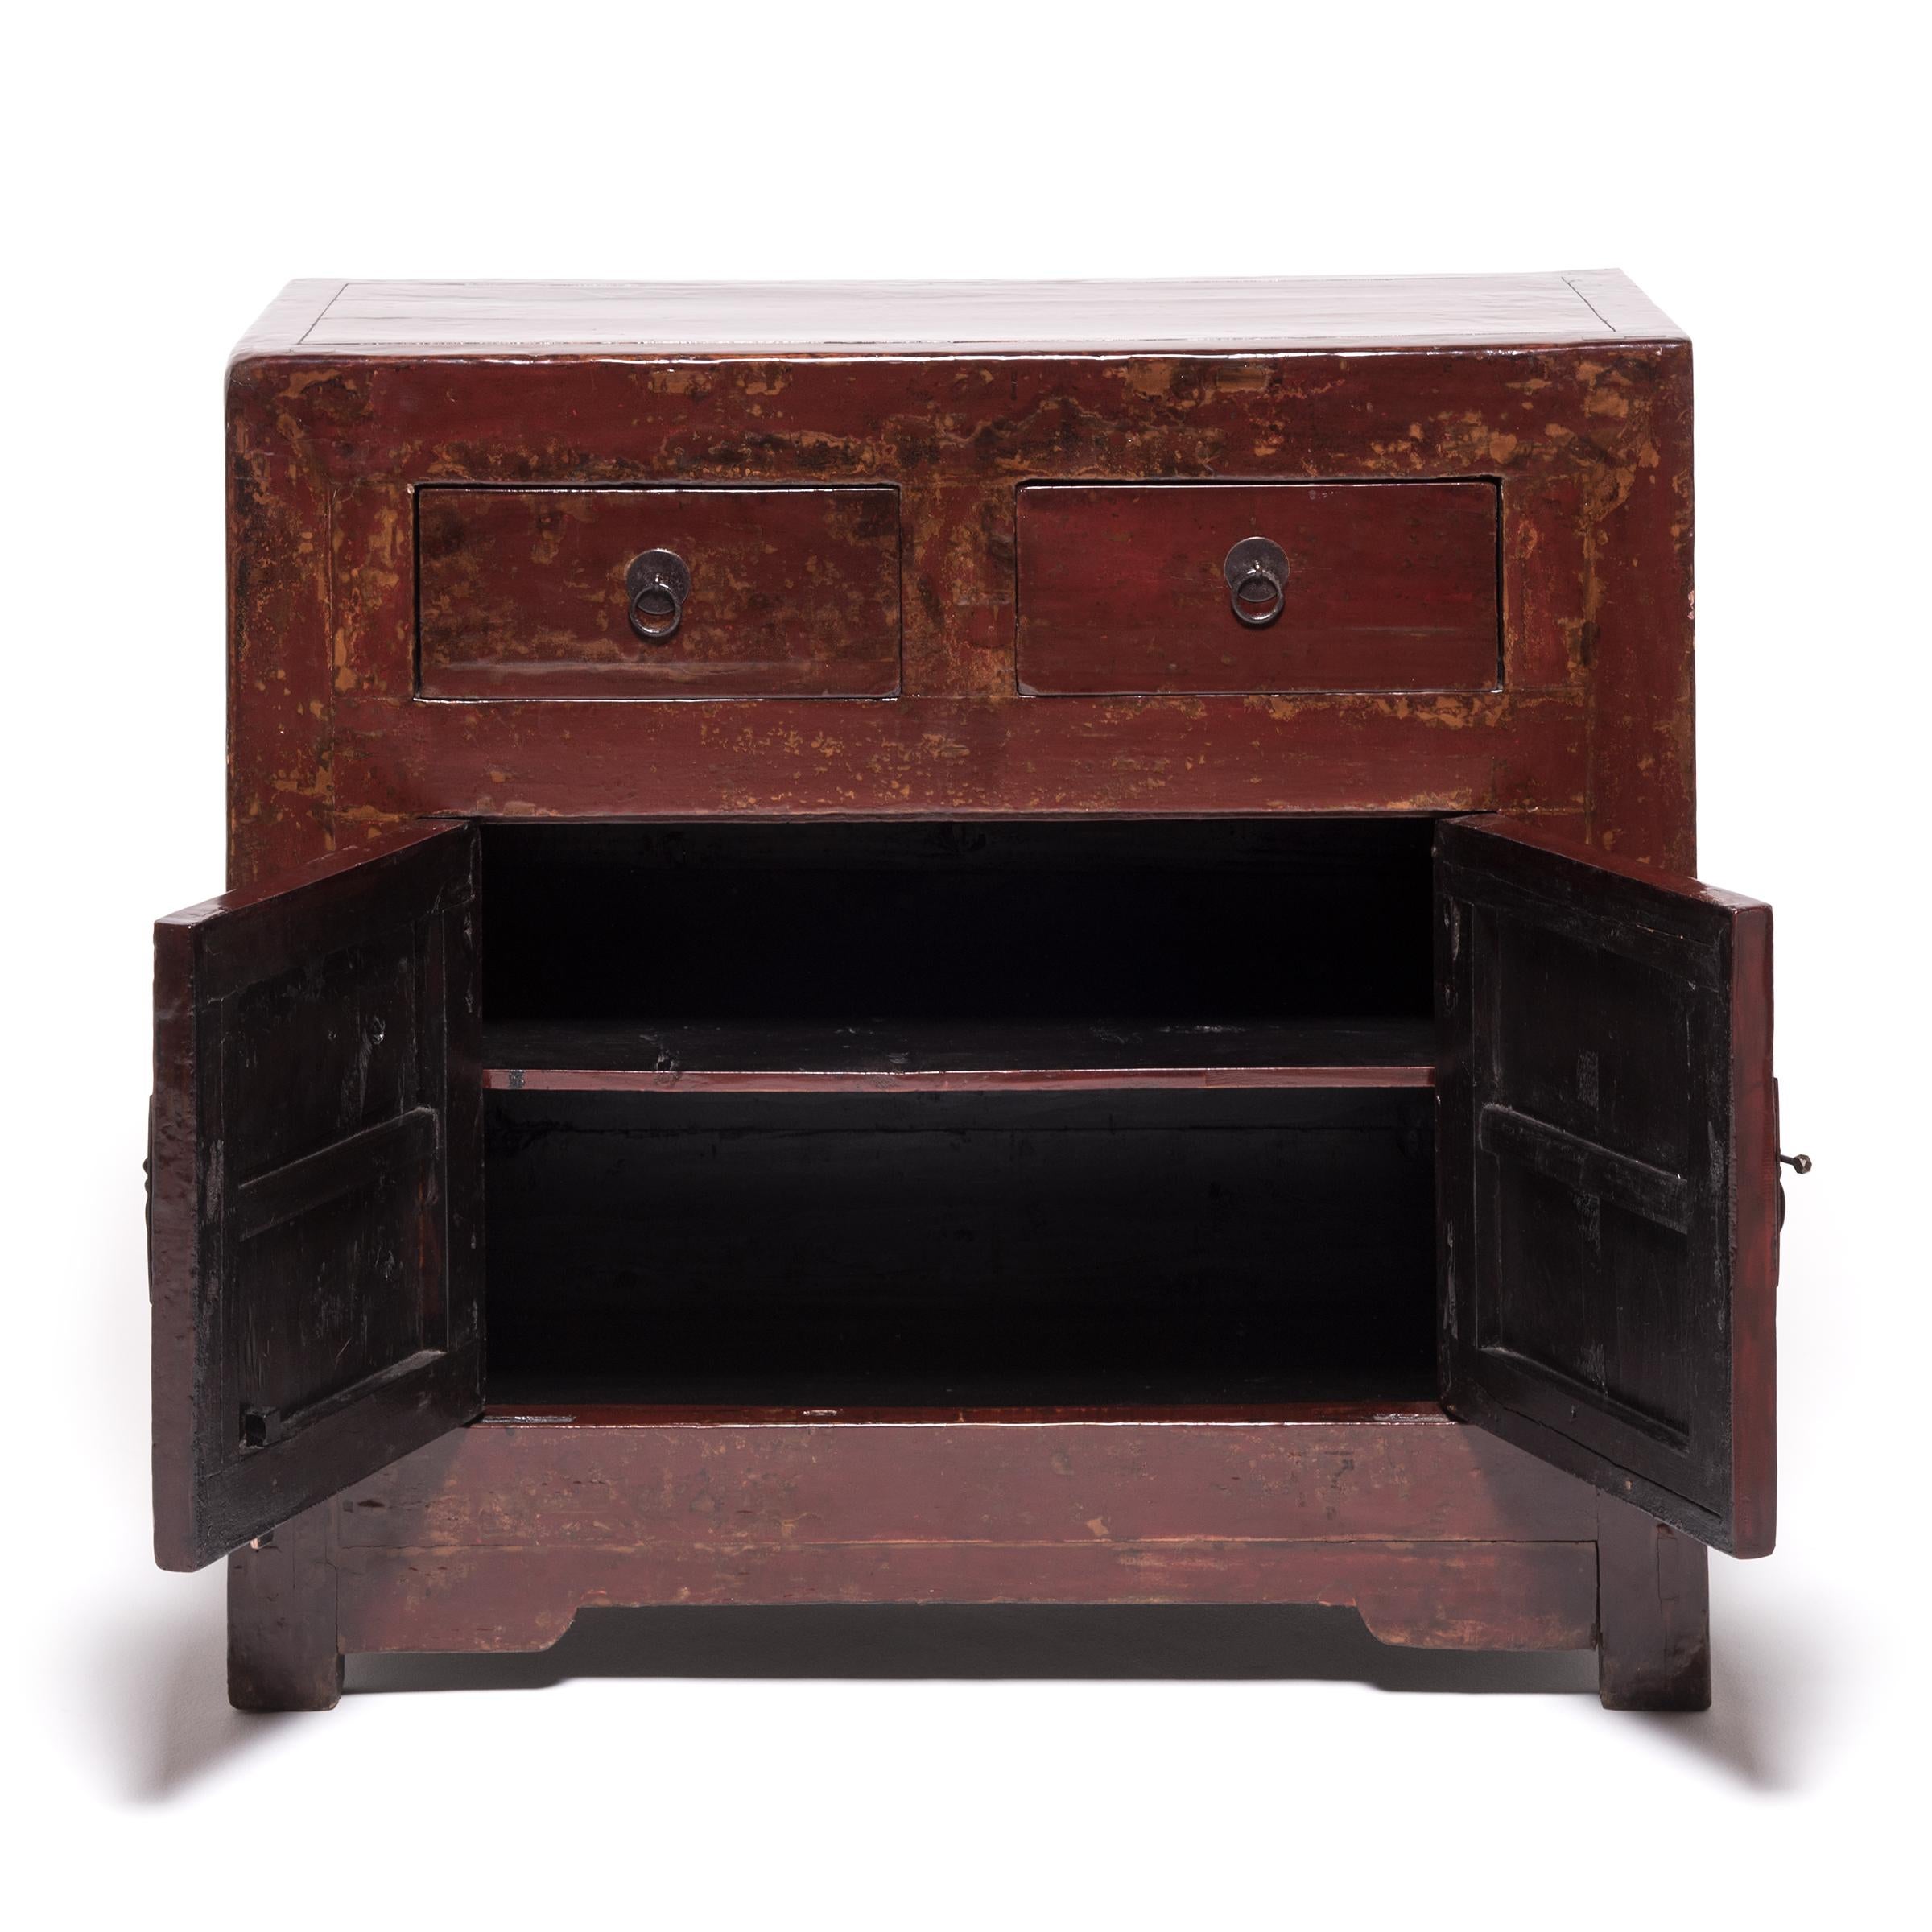 This 19th century chest, hailing out of northern China, started its life as a storage trunk with a solid lacquered front. Artisans, skilled in traditional Chinese carpentry and lacquer finishes, have reconfigured the trunk into a two-door chest,